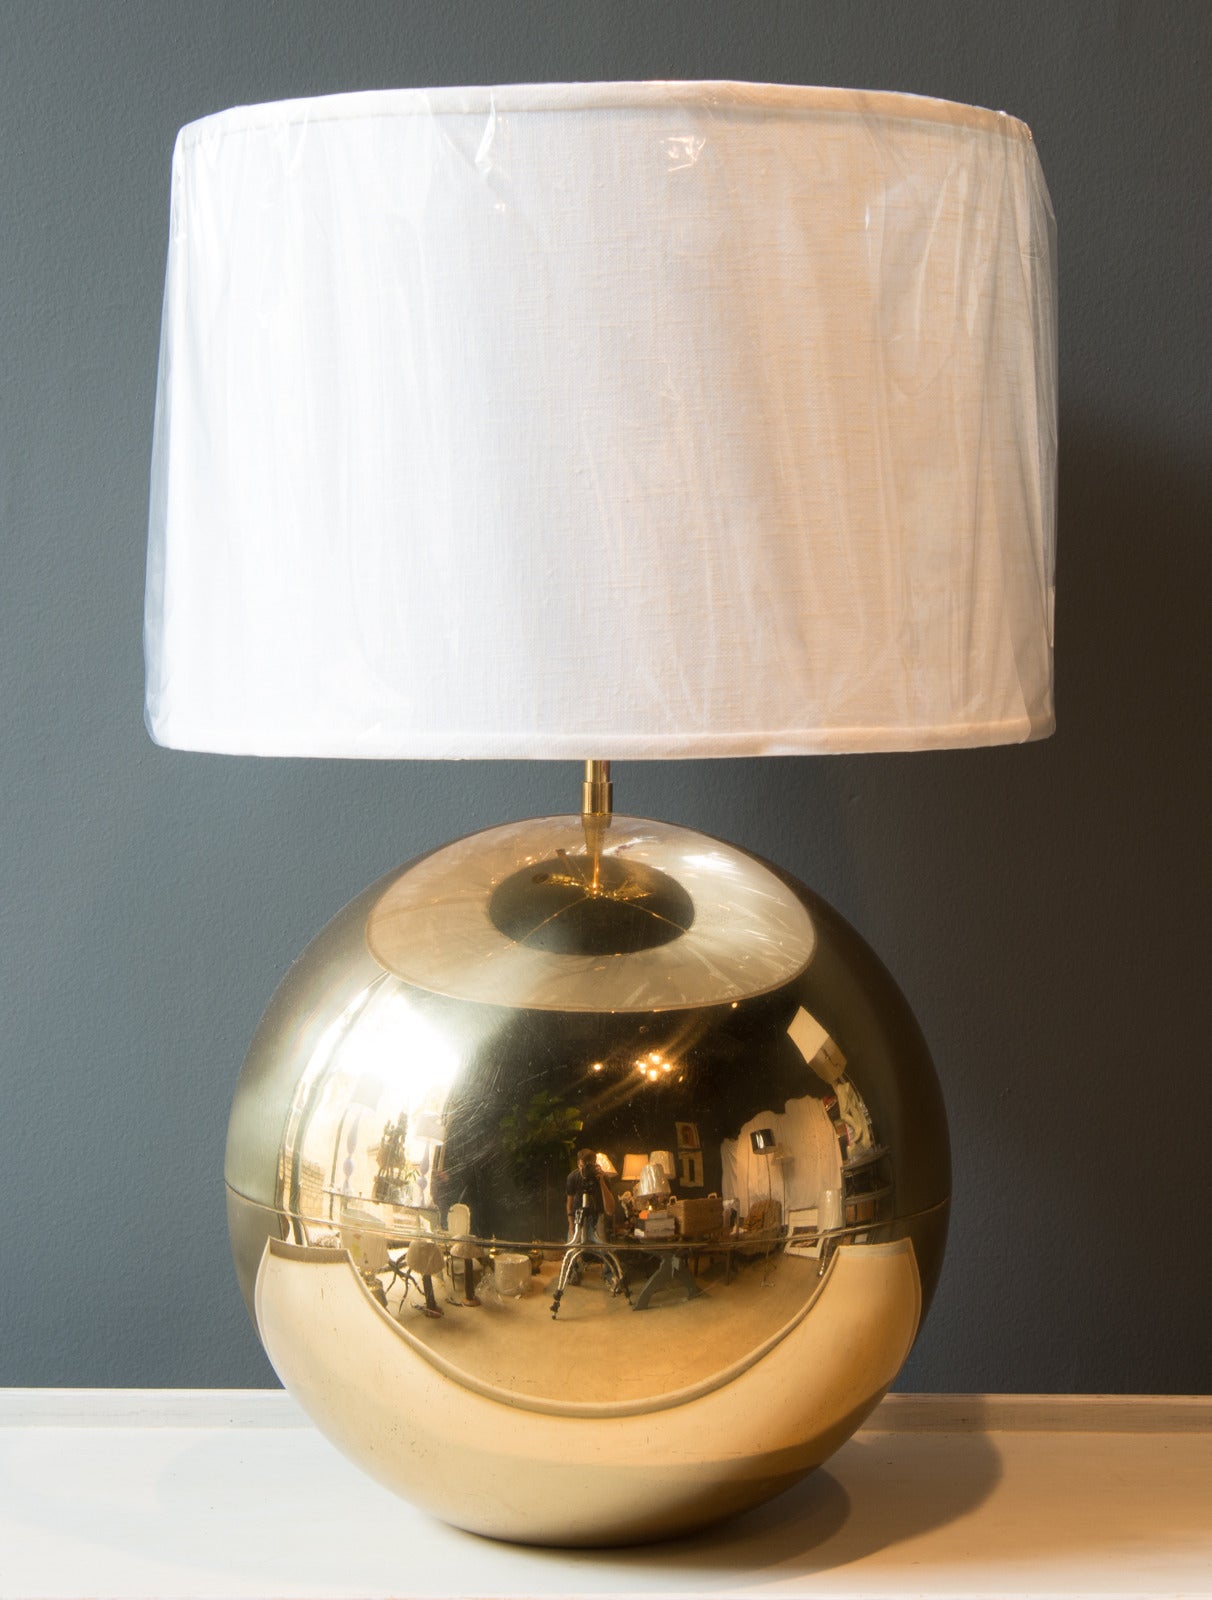 Brass Mid-Century sphere-shaped table lamp attributed to Karl Springer. Lamp base is a large brass sphere with a seam in the center. The lamp includes a new shade. The height to the top the shade is 27